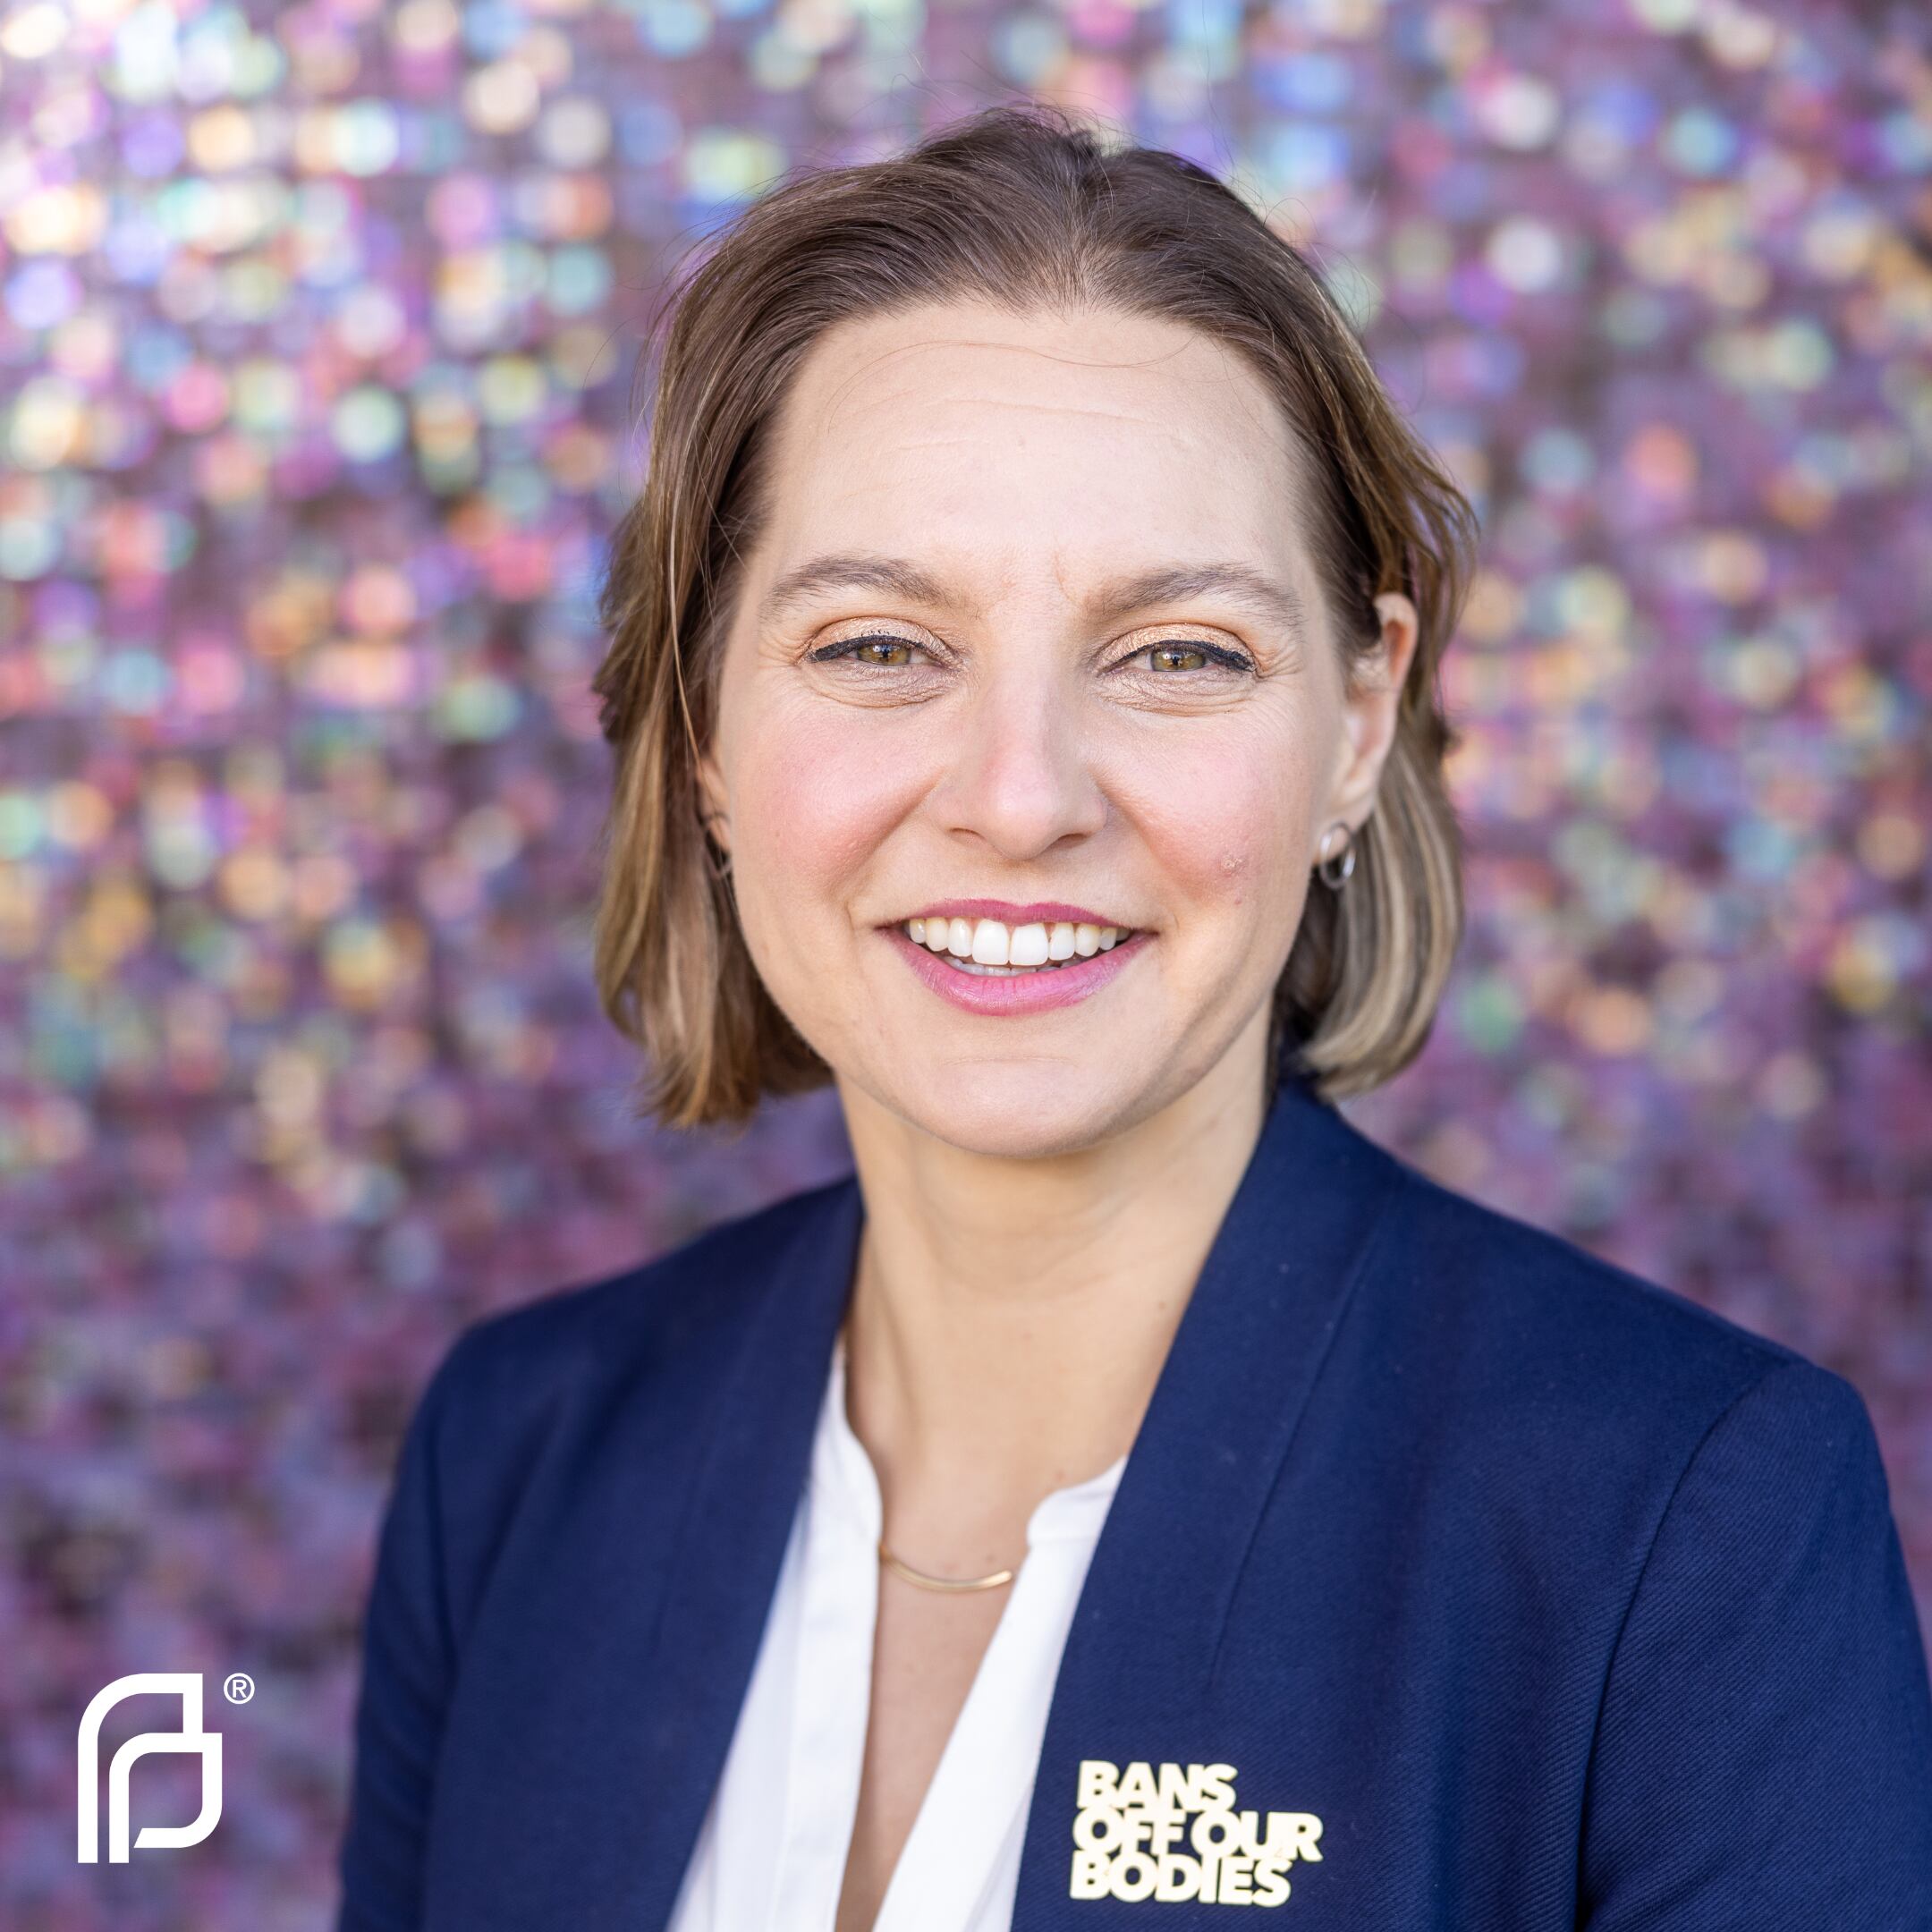 Amy Handler, shown here in an undated provided photo, recently took over as CEO of Planned Parenthood of Southwestern Oregon.